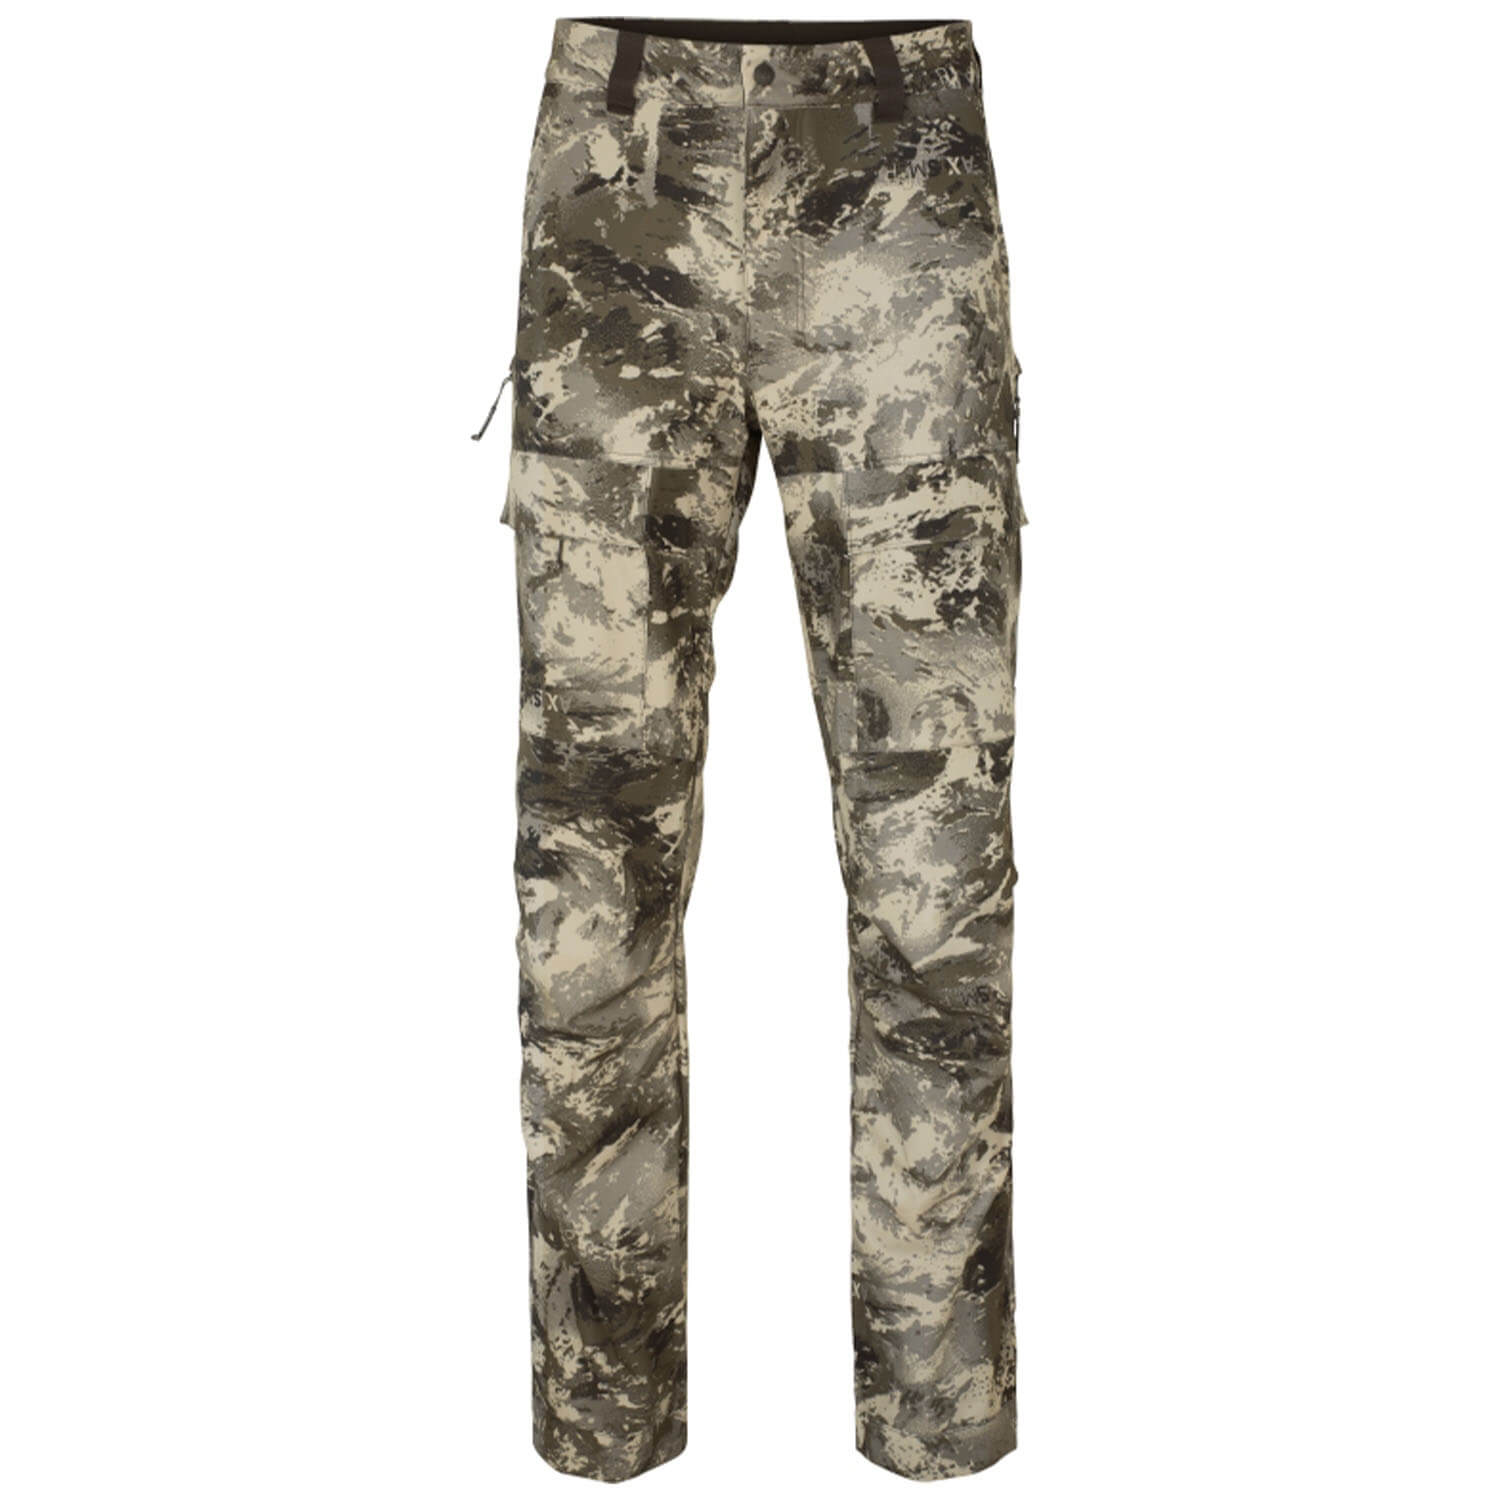 Härkila trousers mountain hunter expedition light - Camouflage Trousers